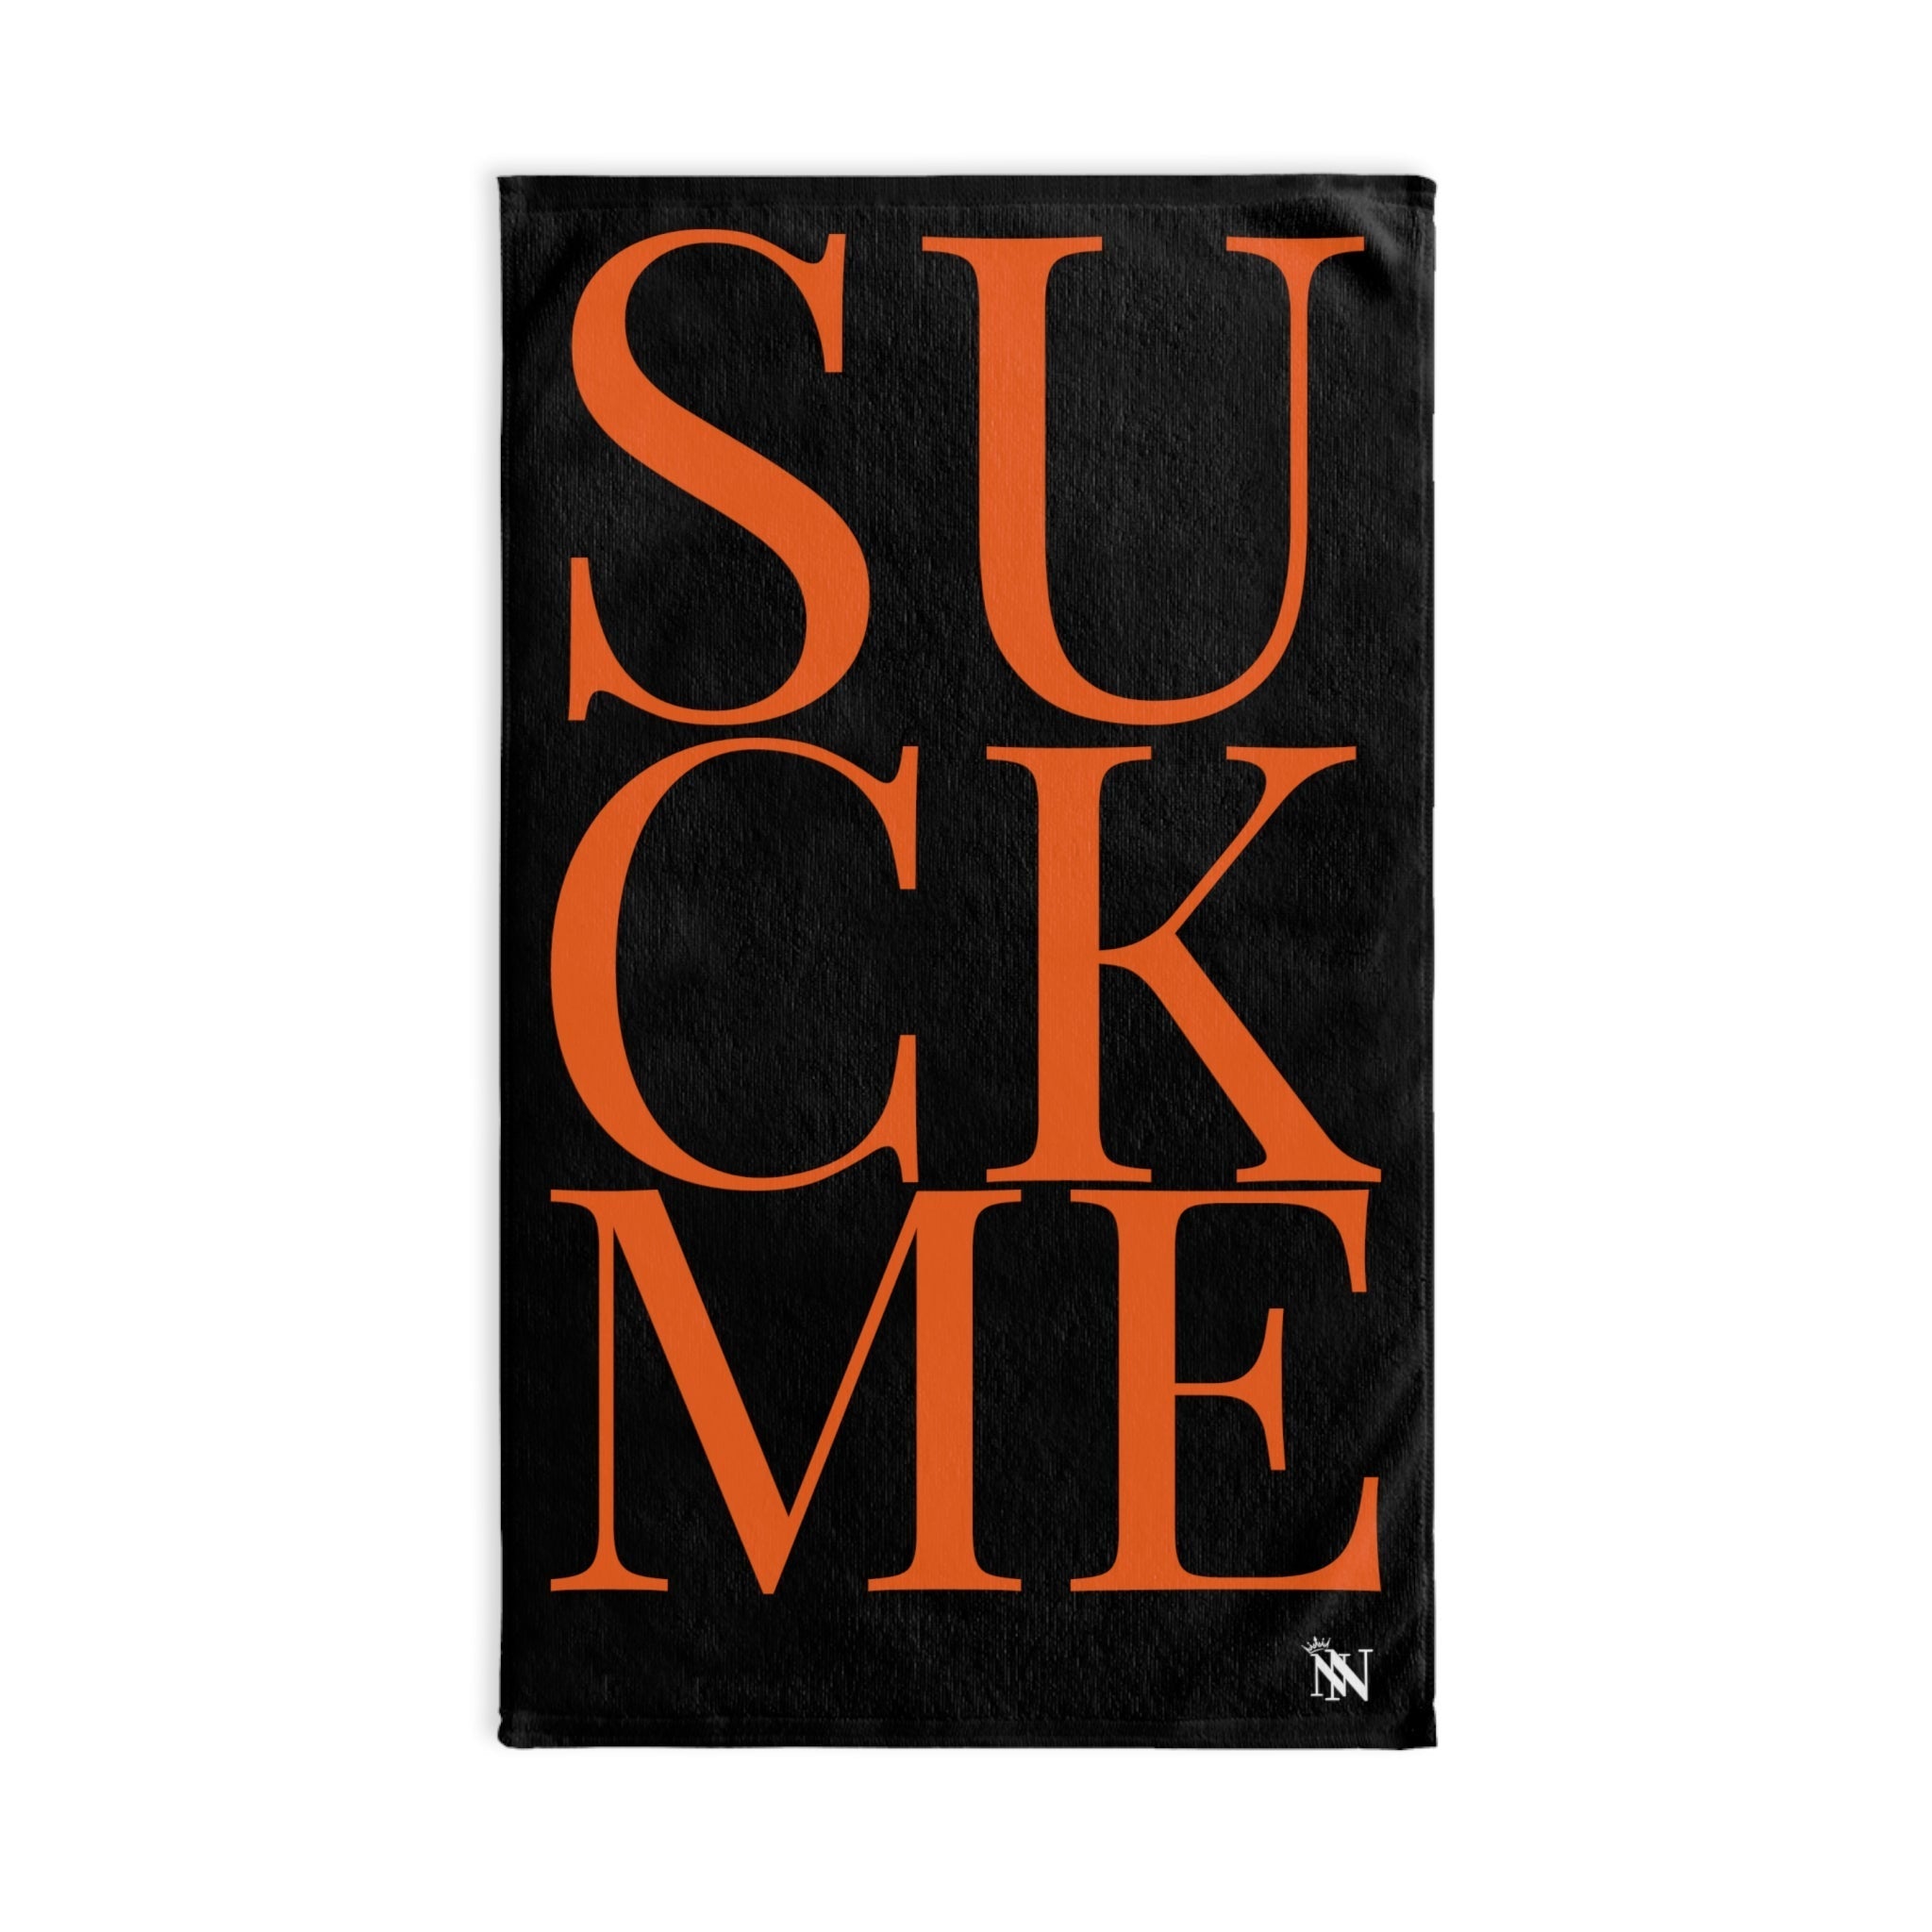 Suck Me Orange Black | Sexy Gifts for Boyfriend, Funny Towel Romantic Gift for Wedding Couple Fiance First Year 2nd Anniversary Valentines, Party Gag Gifts, Joke Humor Cloth for Husband Men BF NECTAR NAPKINS